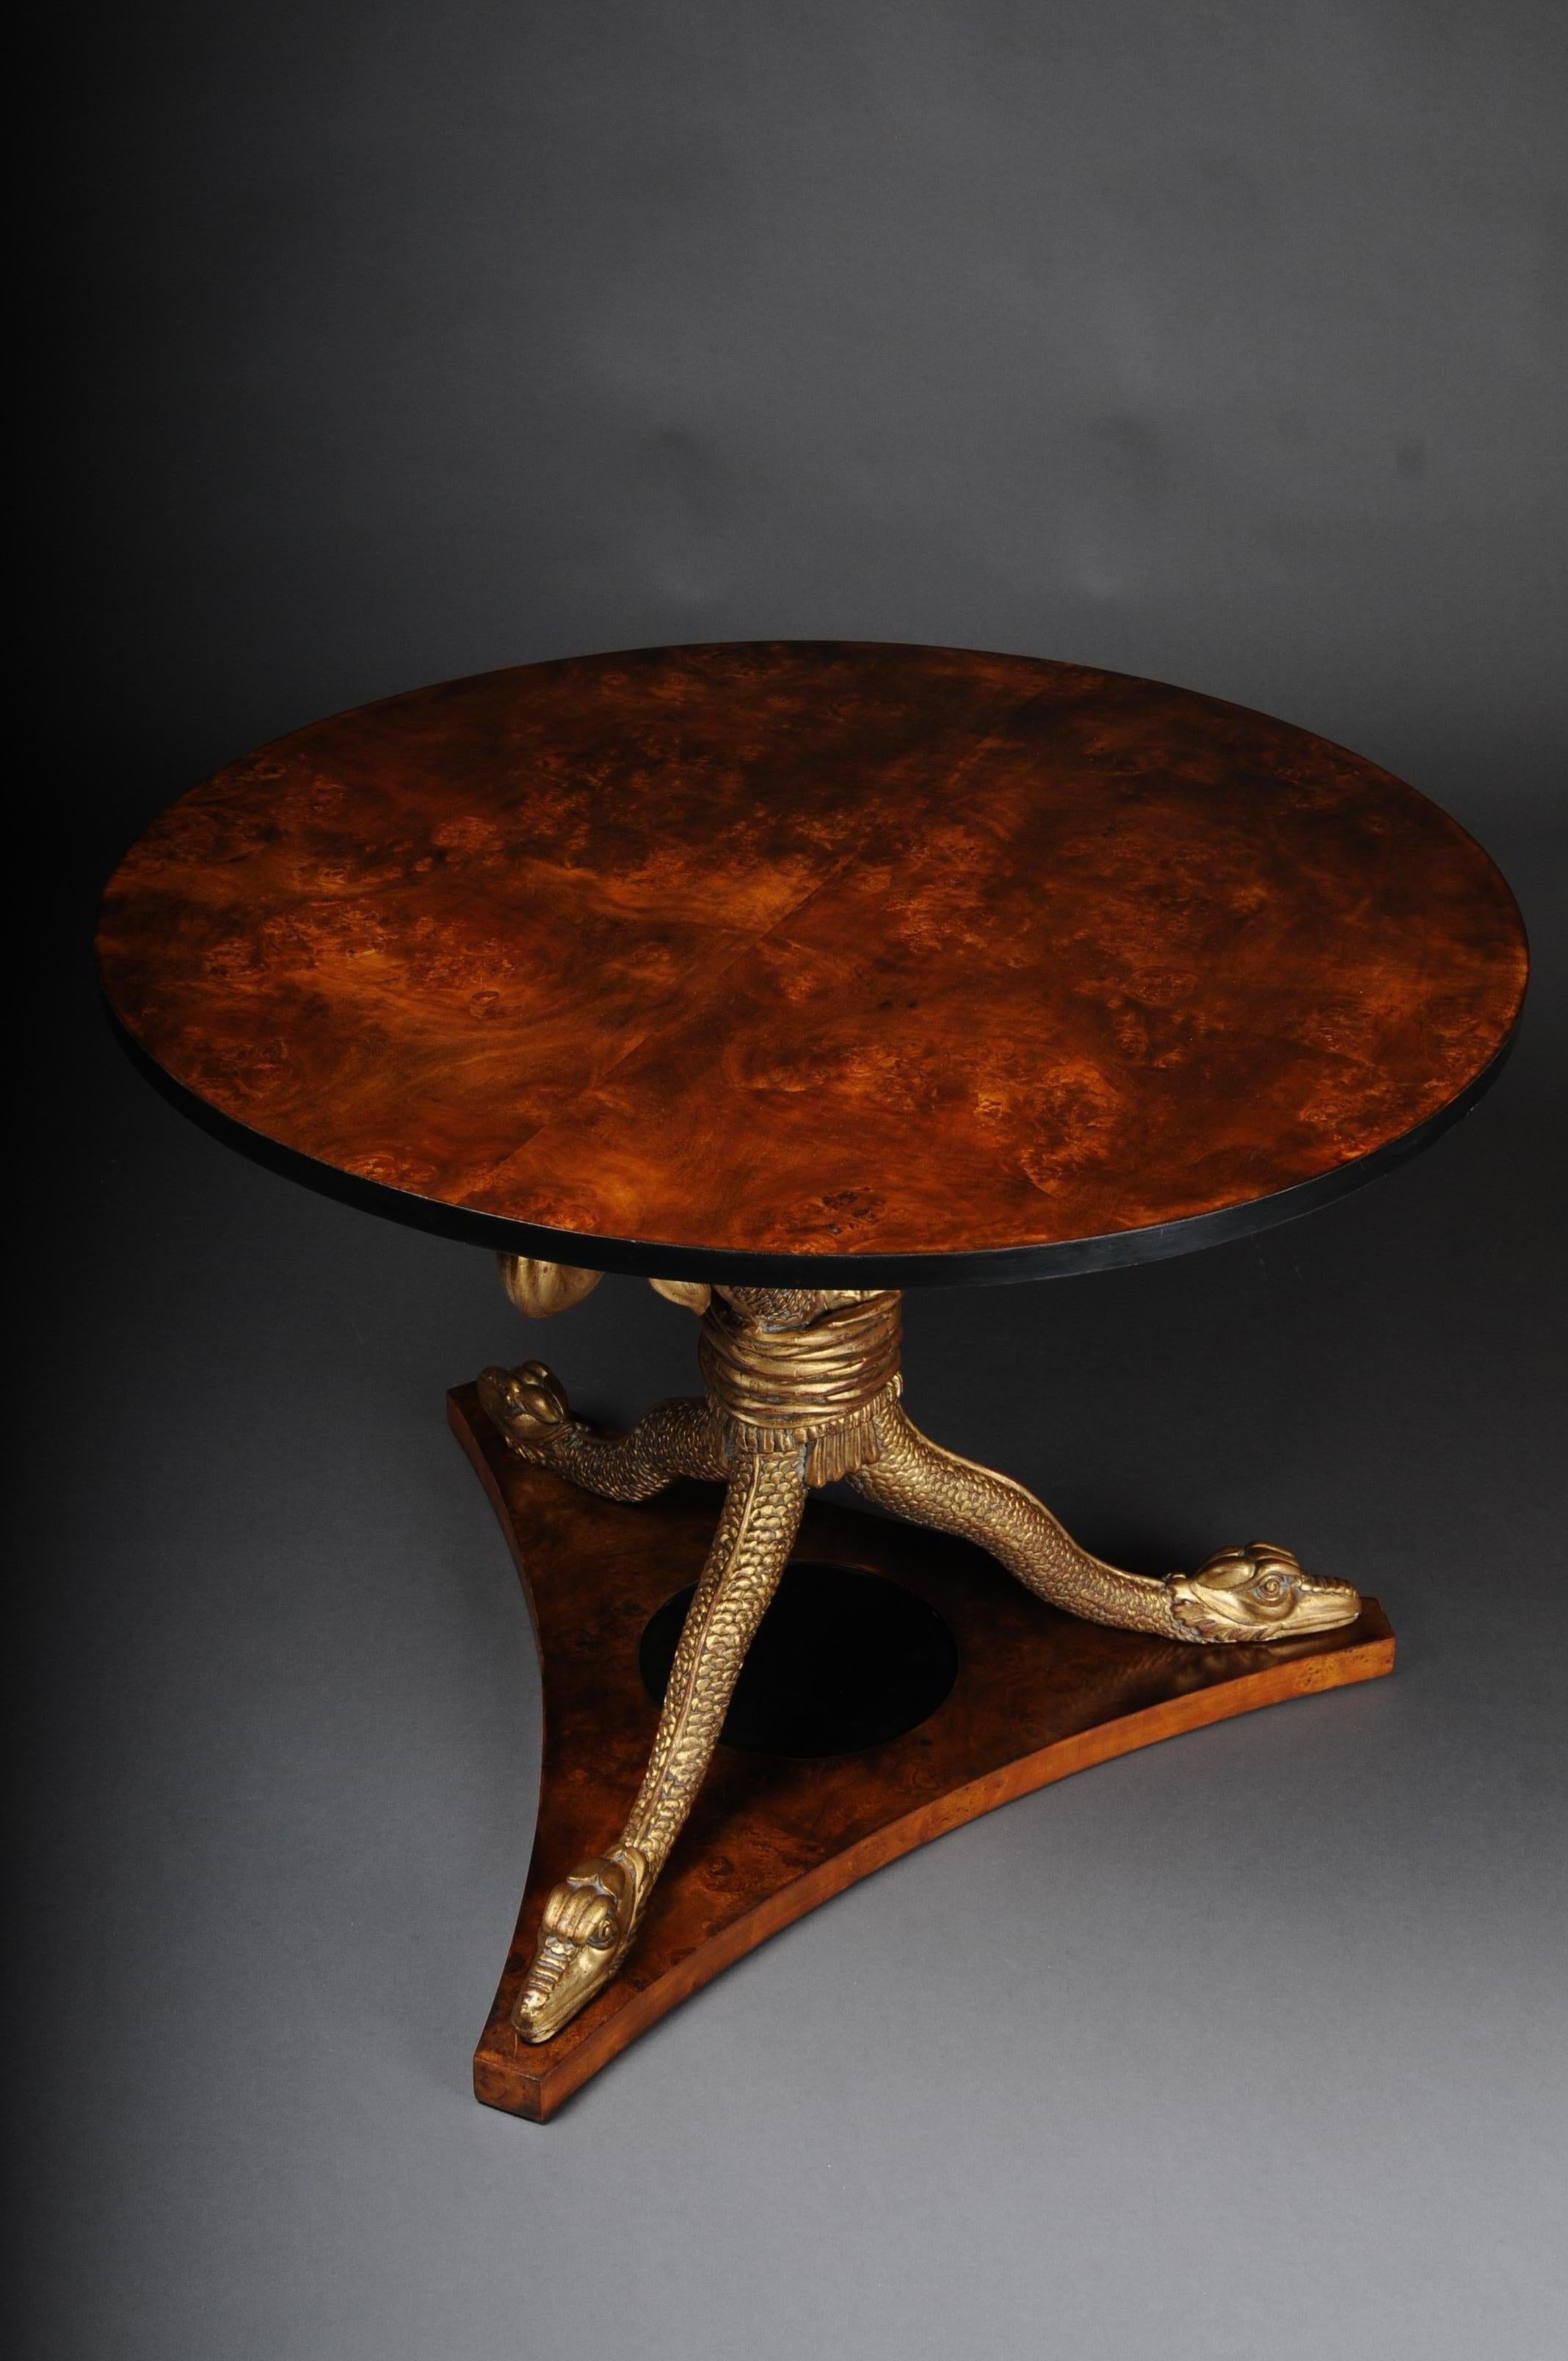 20th Century Snake Table Design After K. F. Schinkel Empire Manner In Good Condition For Sale In Berlin, DE